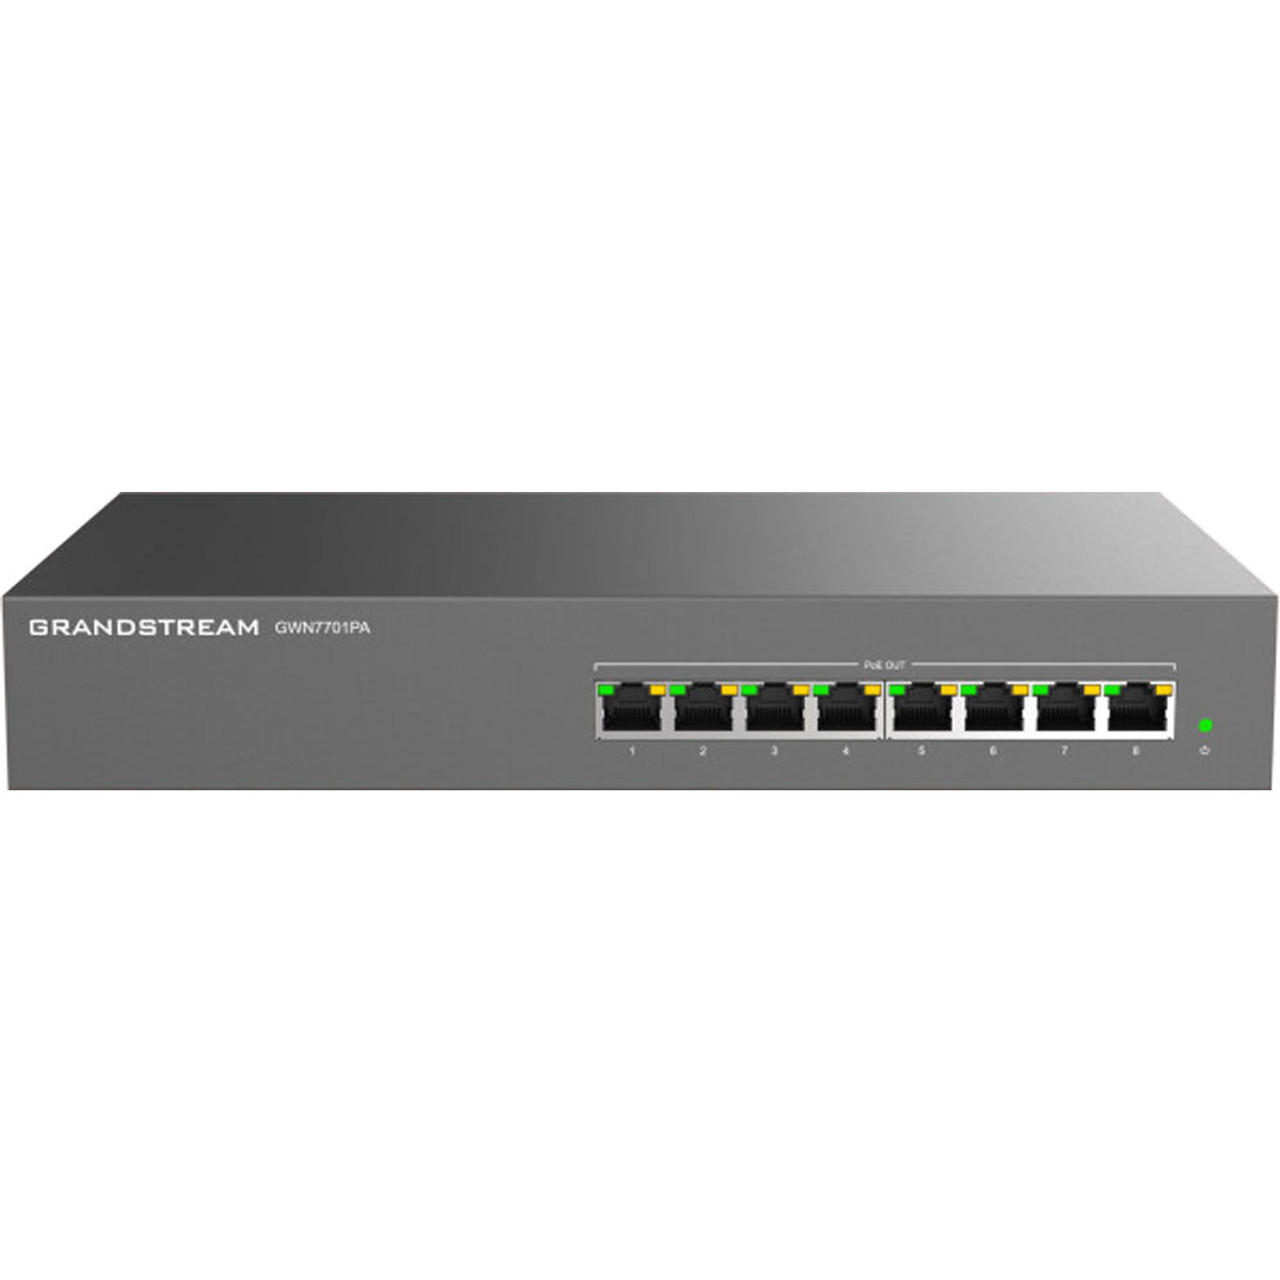 Switch Poe Gigabit No Administrable  8 Puertos 101001000 Mbps  8 Puertos Poe   Hasta 145W GWN7701PA - GWN7701PA